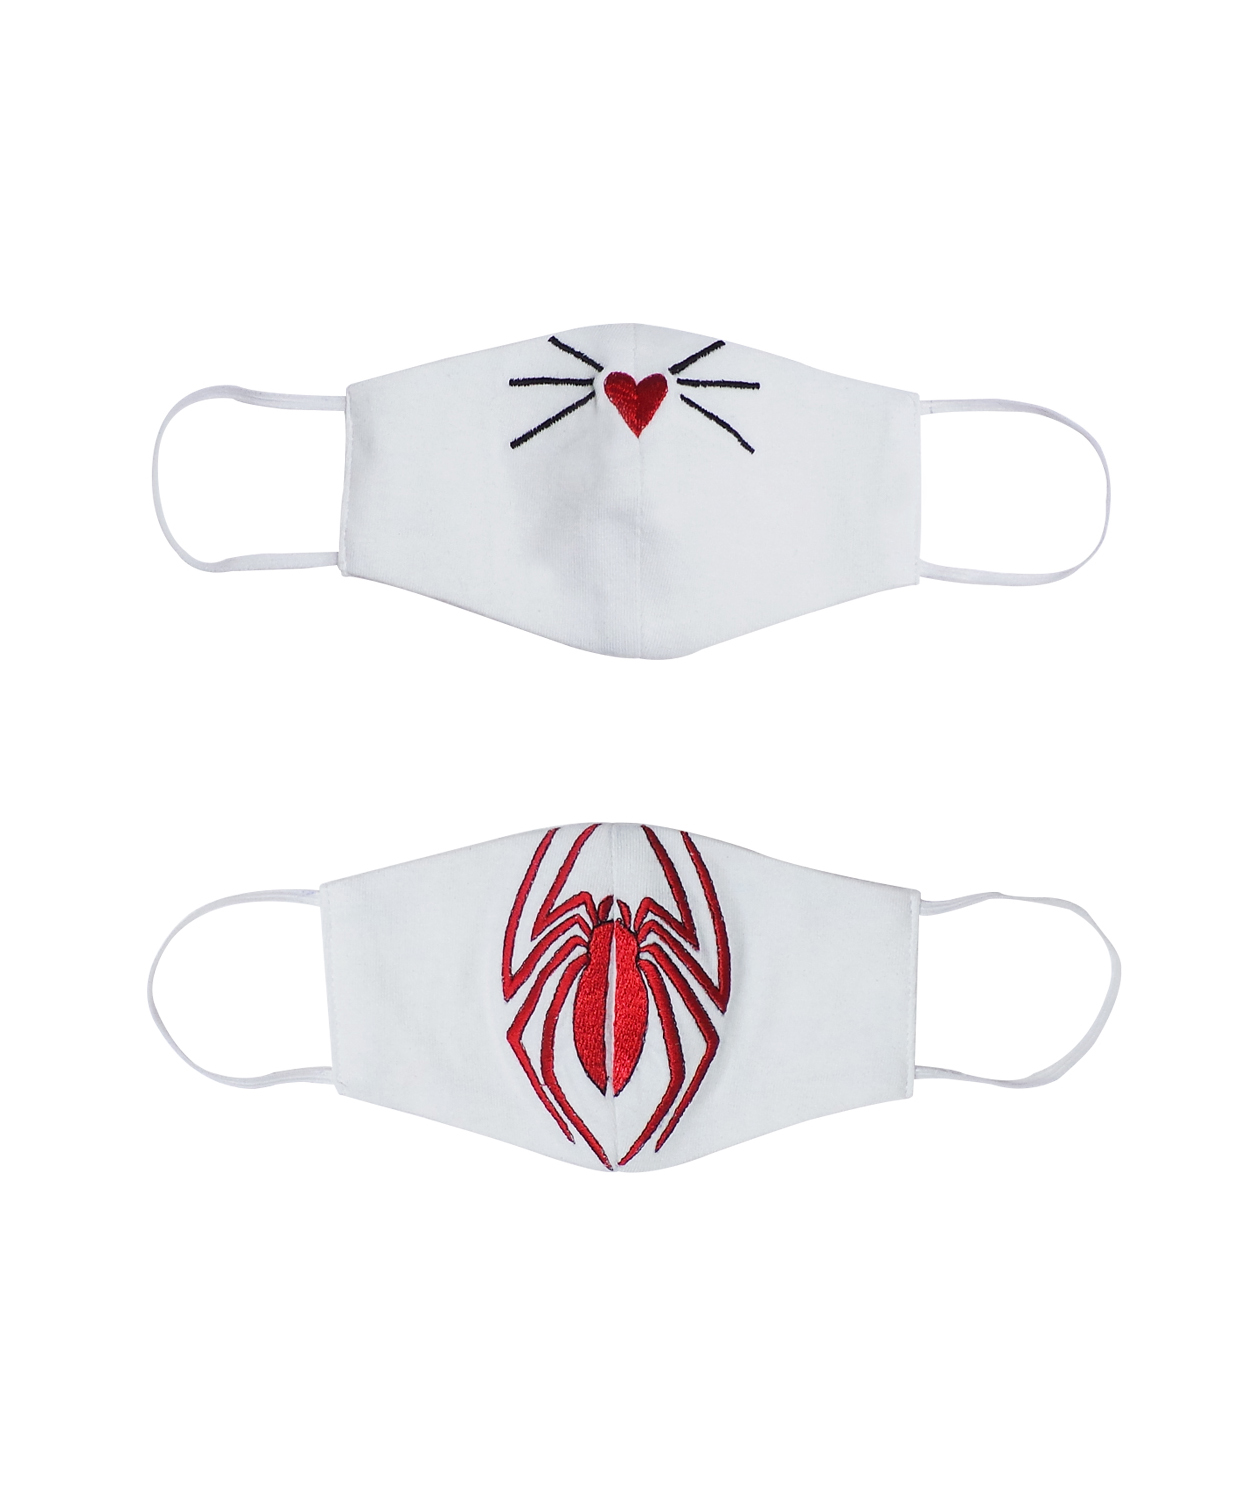 Cute Kitty Mask And Spider Mask - Set of 2